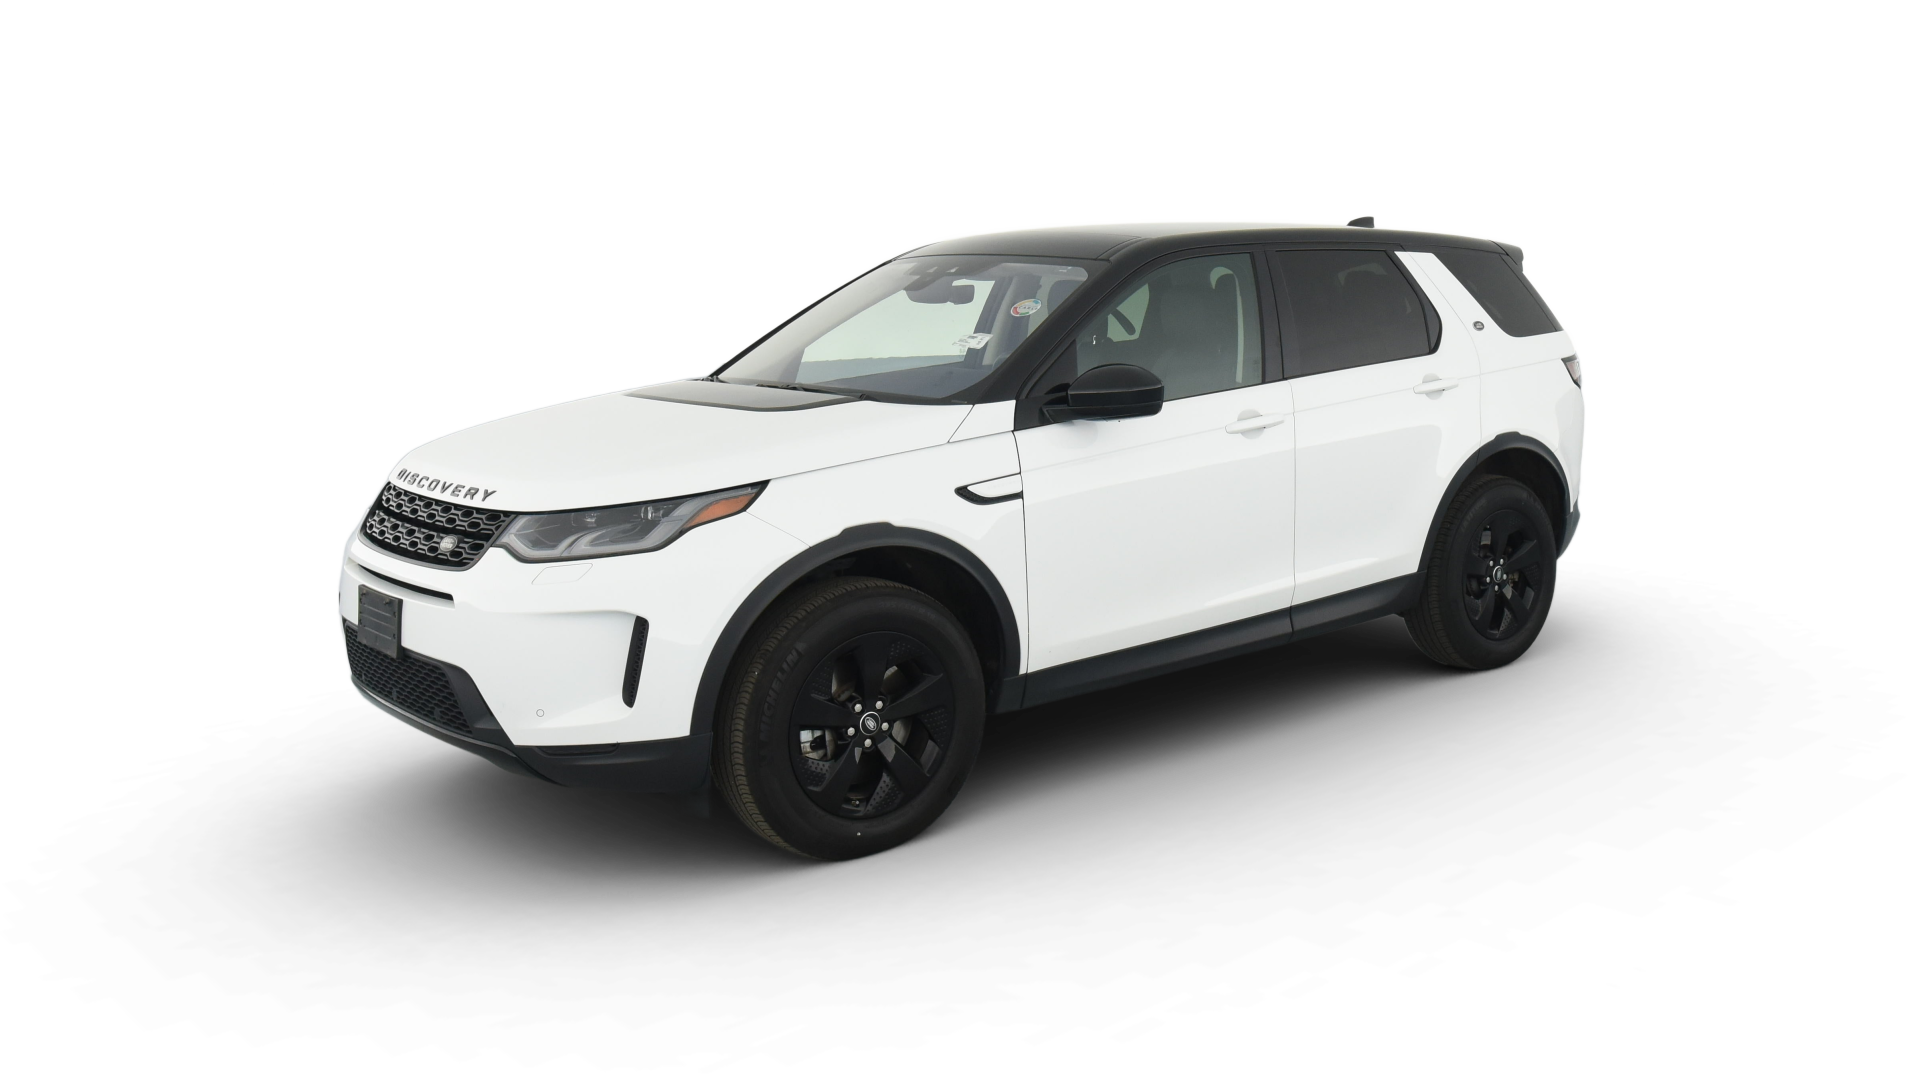 Used Land Rover Discovery Sport for Sale Online